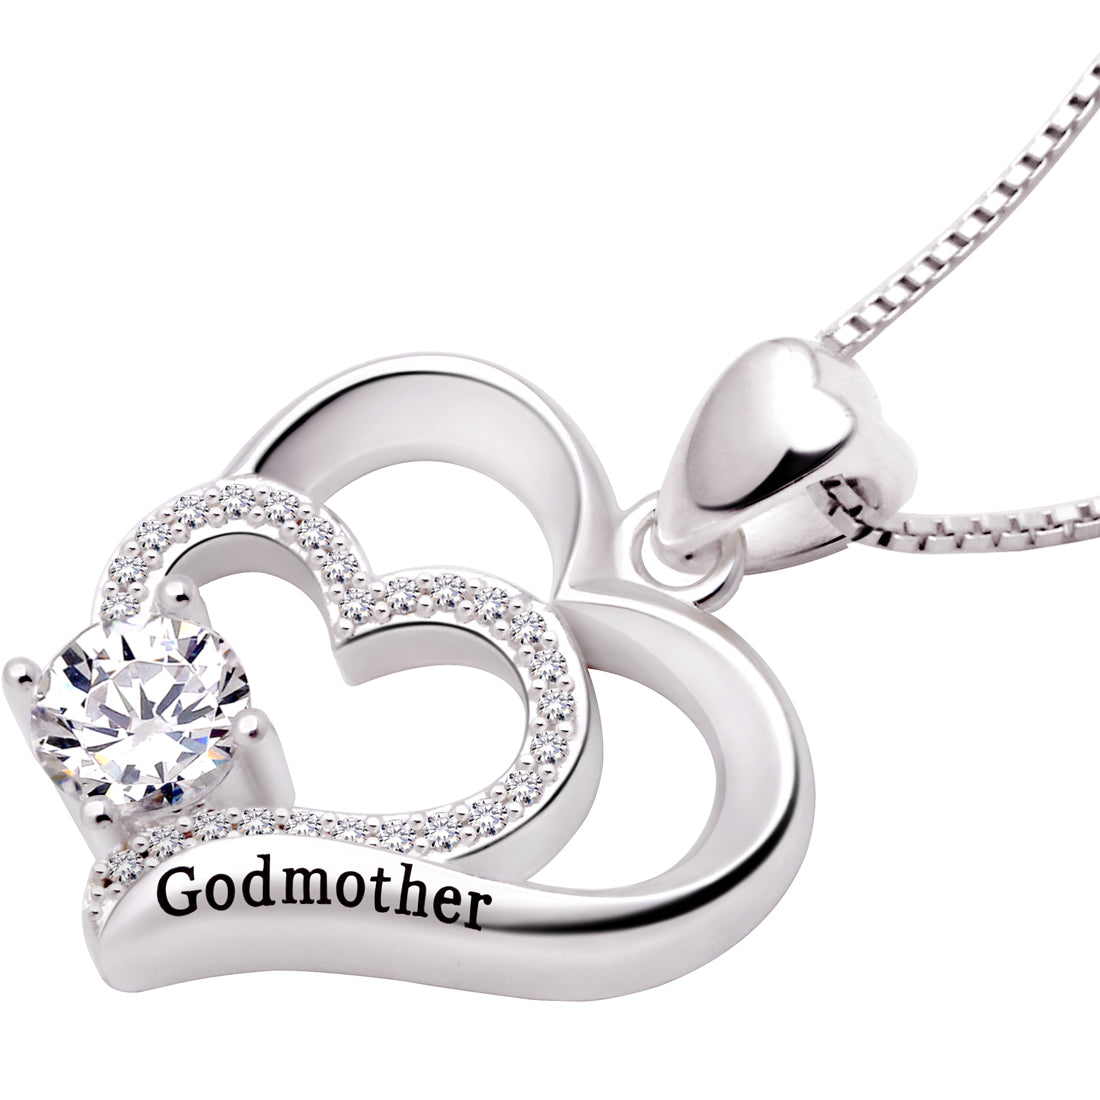 ALOV Jewelry Sterling Silver Godmother Cubic Zirconia Pendant Necklace